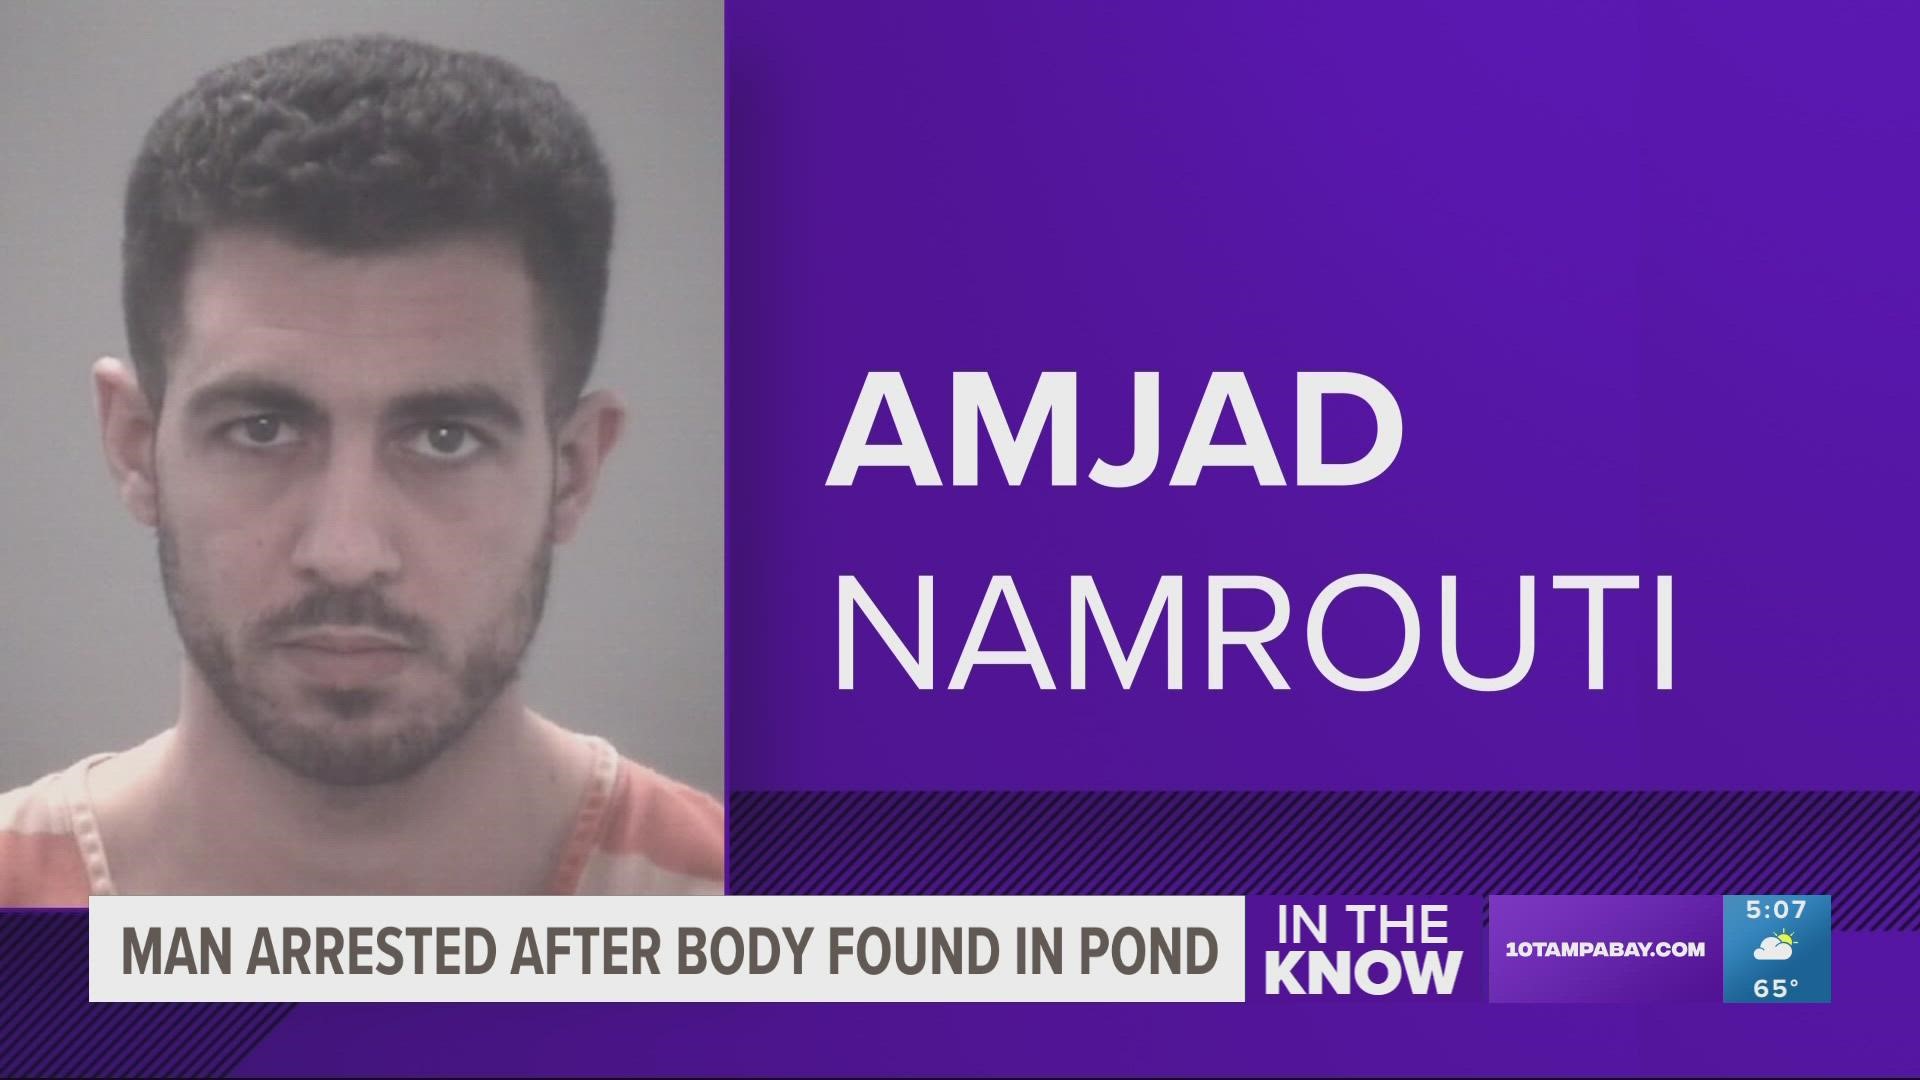 Amjad Namrouti, 28, was charged with first-degree felony murder for the death of Jamie Hobdy, who was found in a retention pond.